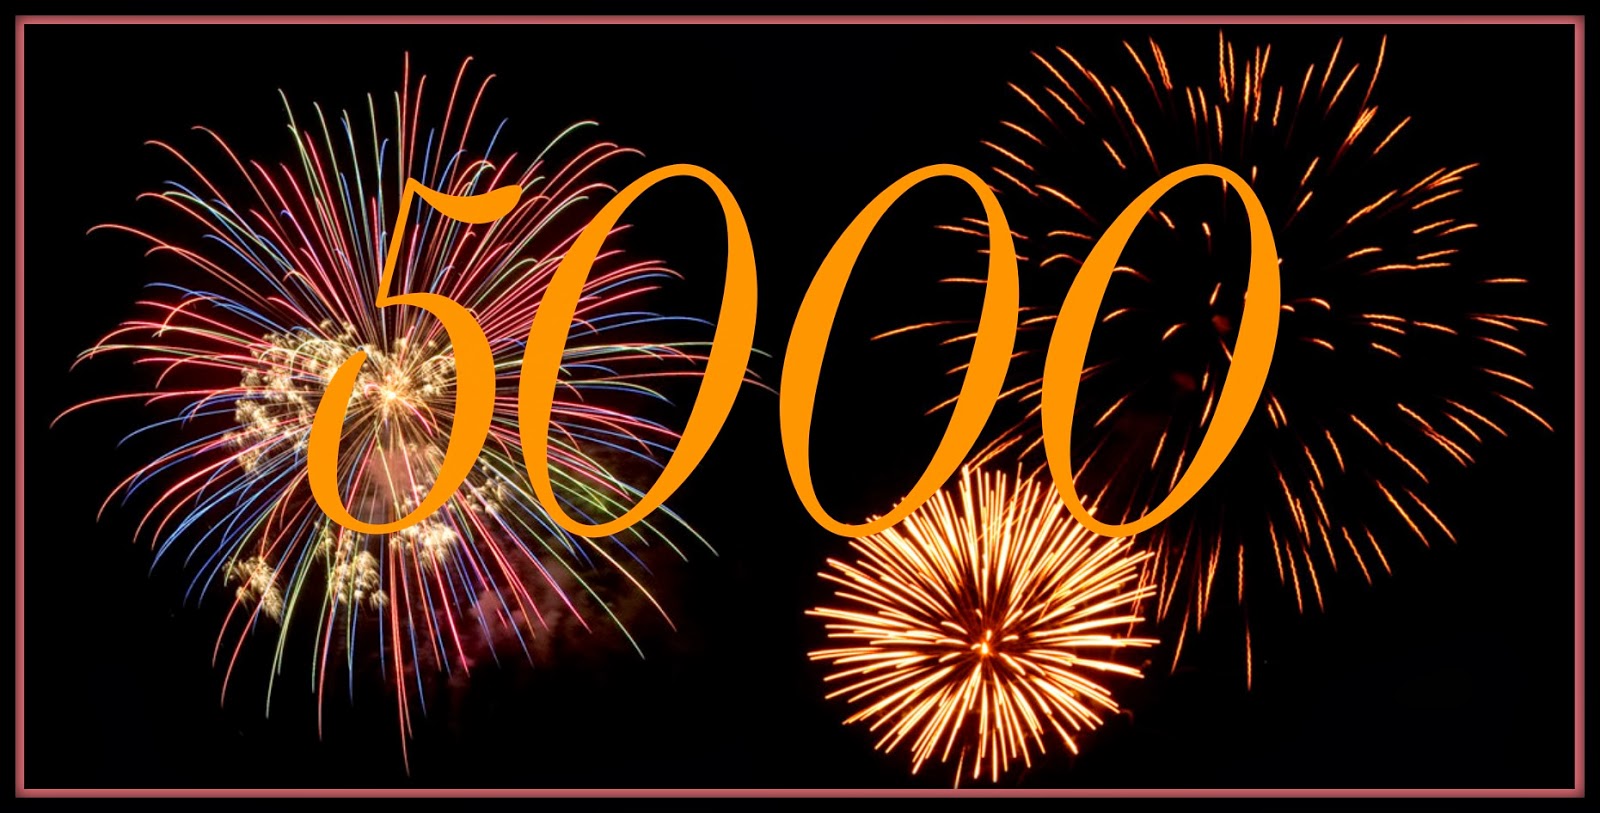 Outlandish Observations: 5000 followers on Facebook!
